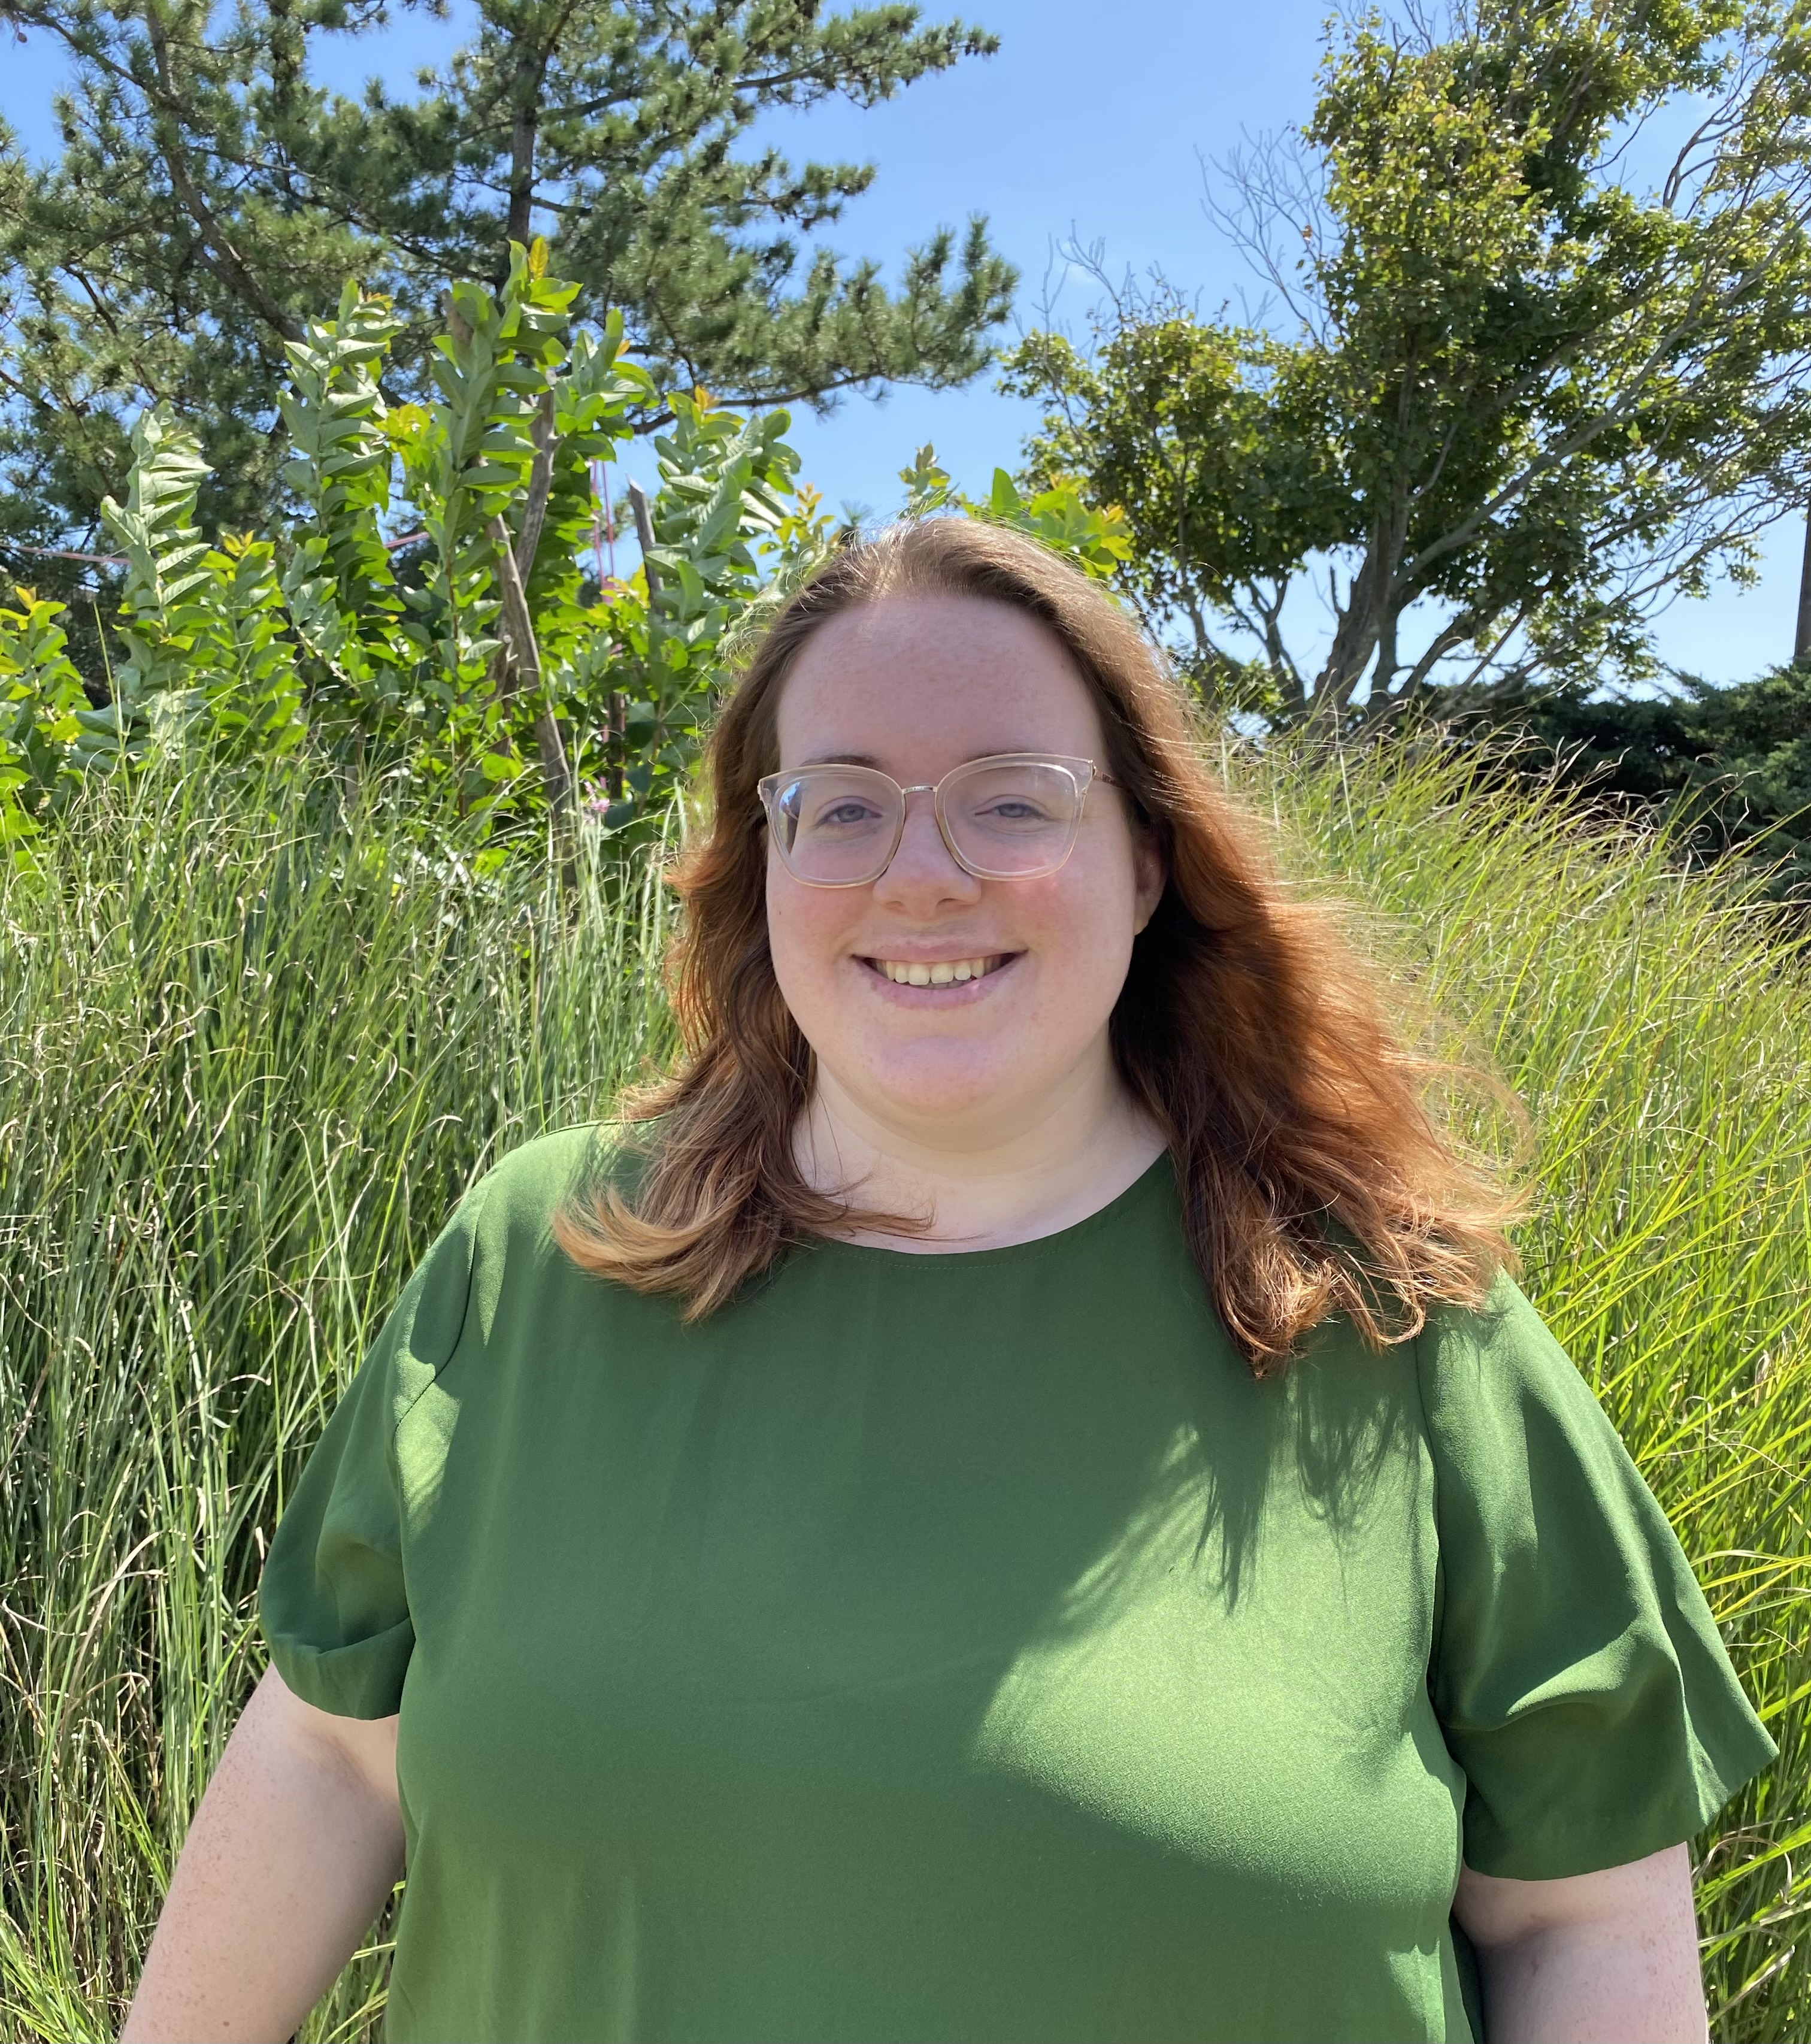 Laura is standing outside in a field. She has shoulder-length auburn hair, is smiling, wearing glass and a green shirt.